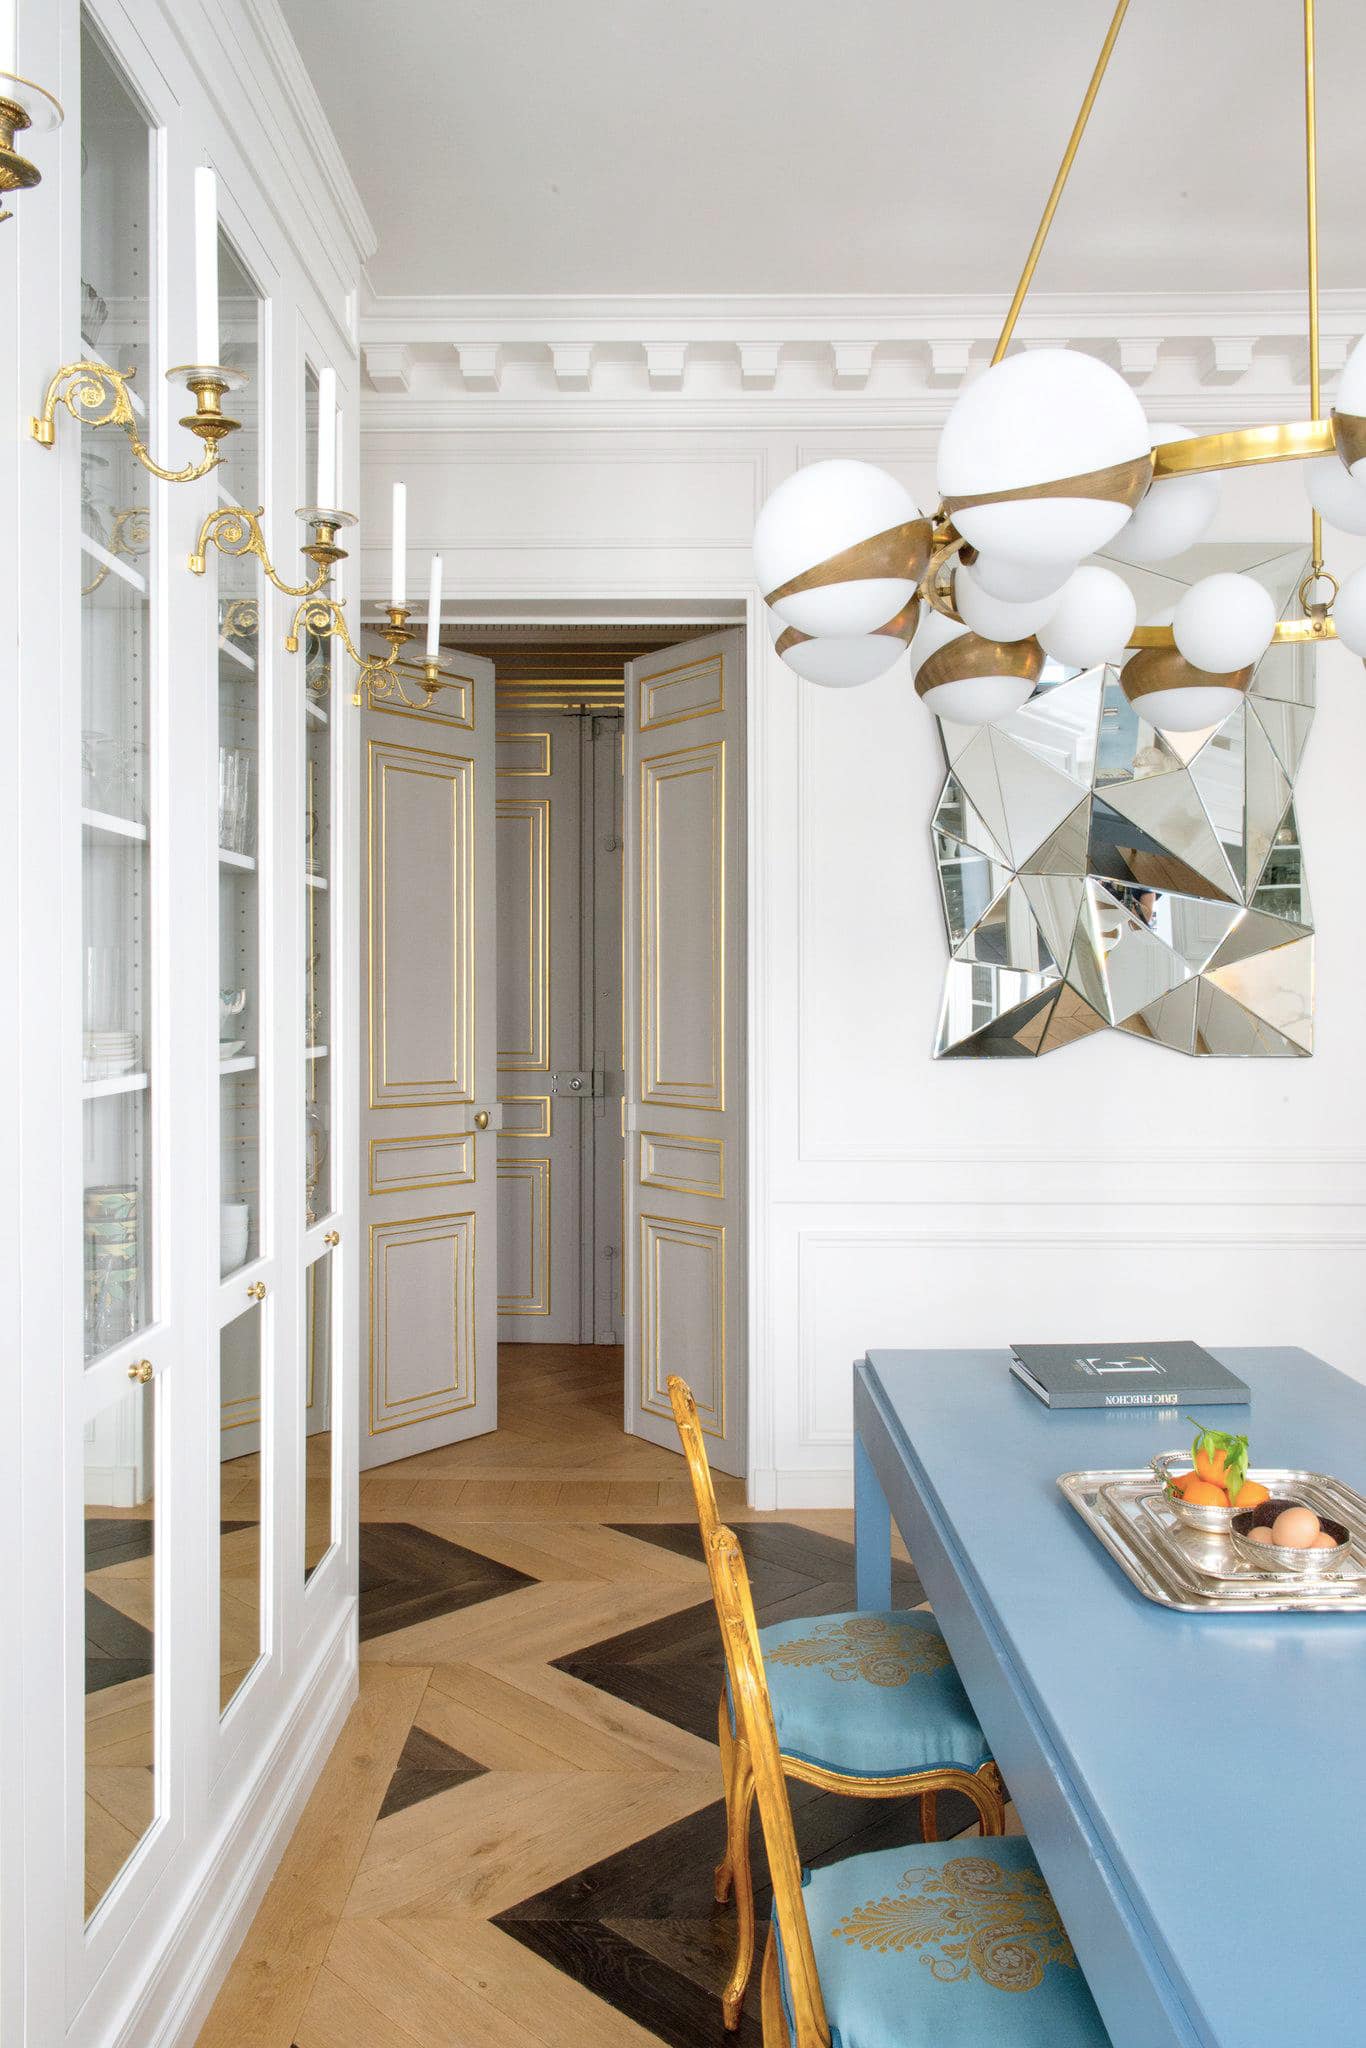 glamorous eclectic modern parisian kitchen with a blue island and brass accents | room of the week on coco kelley